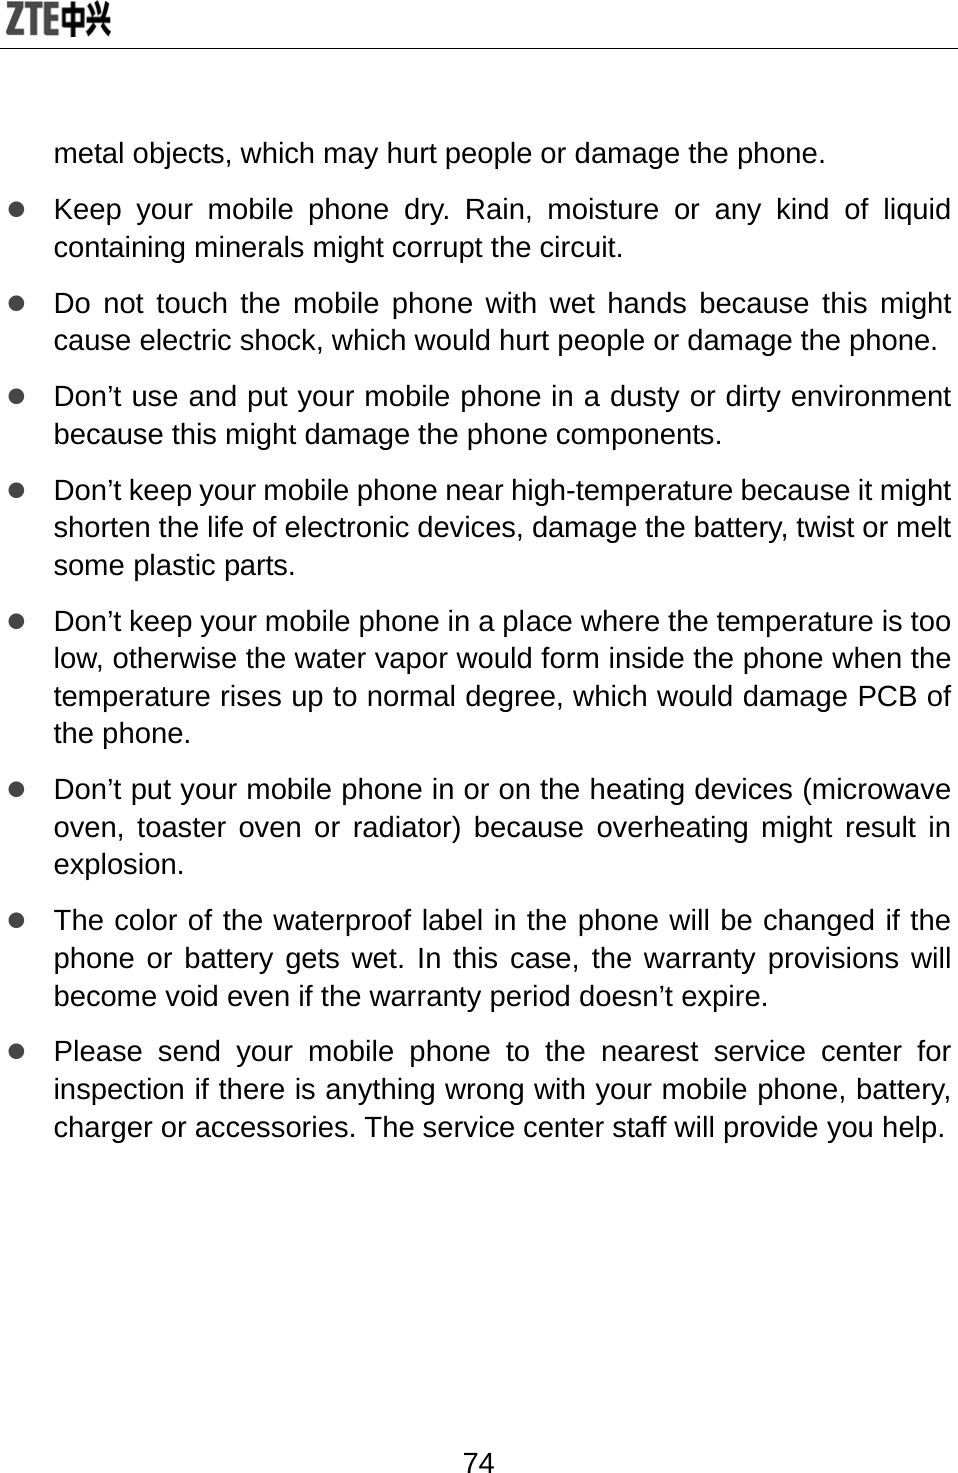  74 metal objects, which may hurt people or damage the phone. z Keep your mobile phone dry. Rain, moisture or any kind of liquid containing minerals might corrupt the circuit. z Do not touch the mobile phone with wet hands because this might cause electric shock, which would hurt people or damage the phone.   z Don’t use and put your mobile phone in a dusty or dirty environment because this might damage the phone components. z Don’t keep your mobile phone near high-temperature because it might shorten the life of electronic devices, damage the battery, twist or melt some plastic parts. z Don’t keep your mobile phone in a place where the temperature is too low, otherwise the water vapor would form inside the phone when the temperature rises up to normal degree, which would damage PCB of the phone. z Don’t put your mobile phone in or on the heating devices (microwave oven, toaster oven or radiator) because overheating might result in explosion.  z The color of the waterproof label in the phone will be changed if the phone or battery gets wet. In this case, the warranty provisions will become void even if the warranty period doesn’t expire. z Please send your mobile phone to the nearest service center for inspection if there is anything wrong with your mobile phone, battery, charger or accessories. The service center staff will provide you help.    